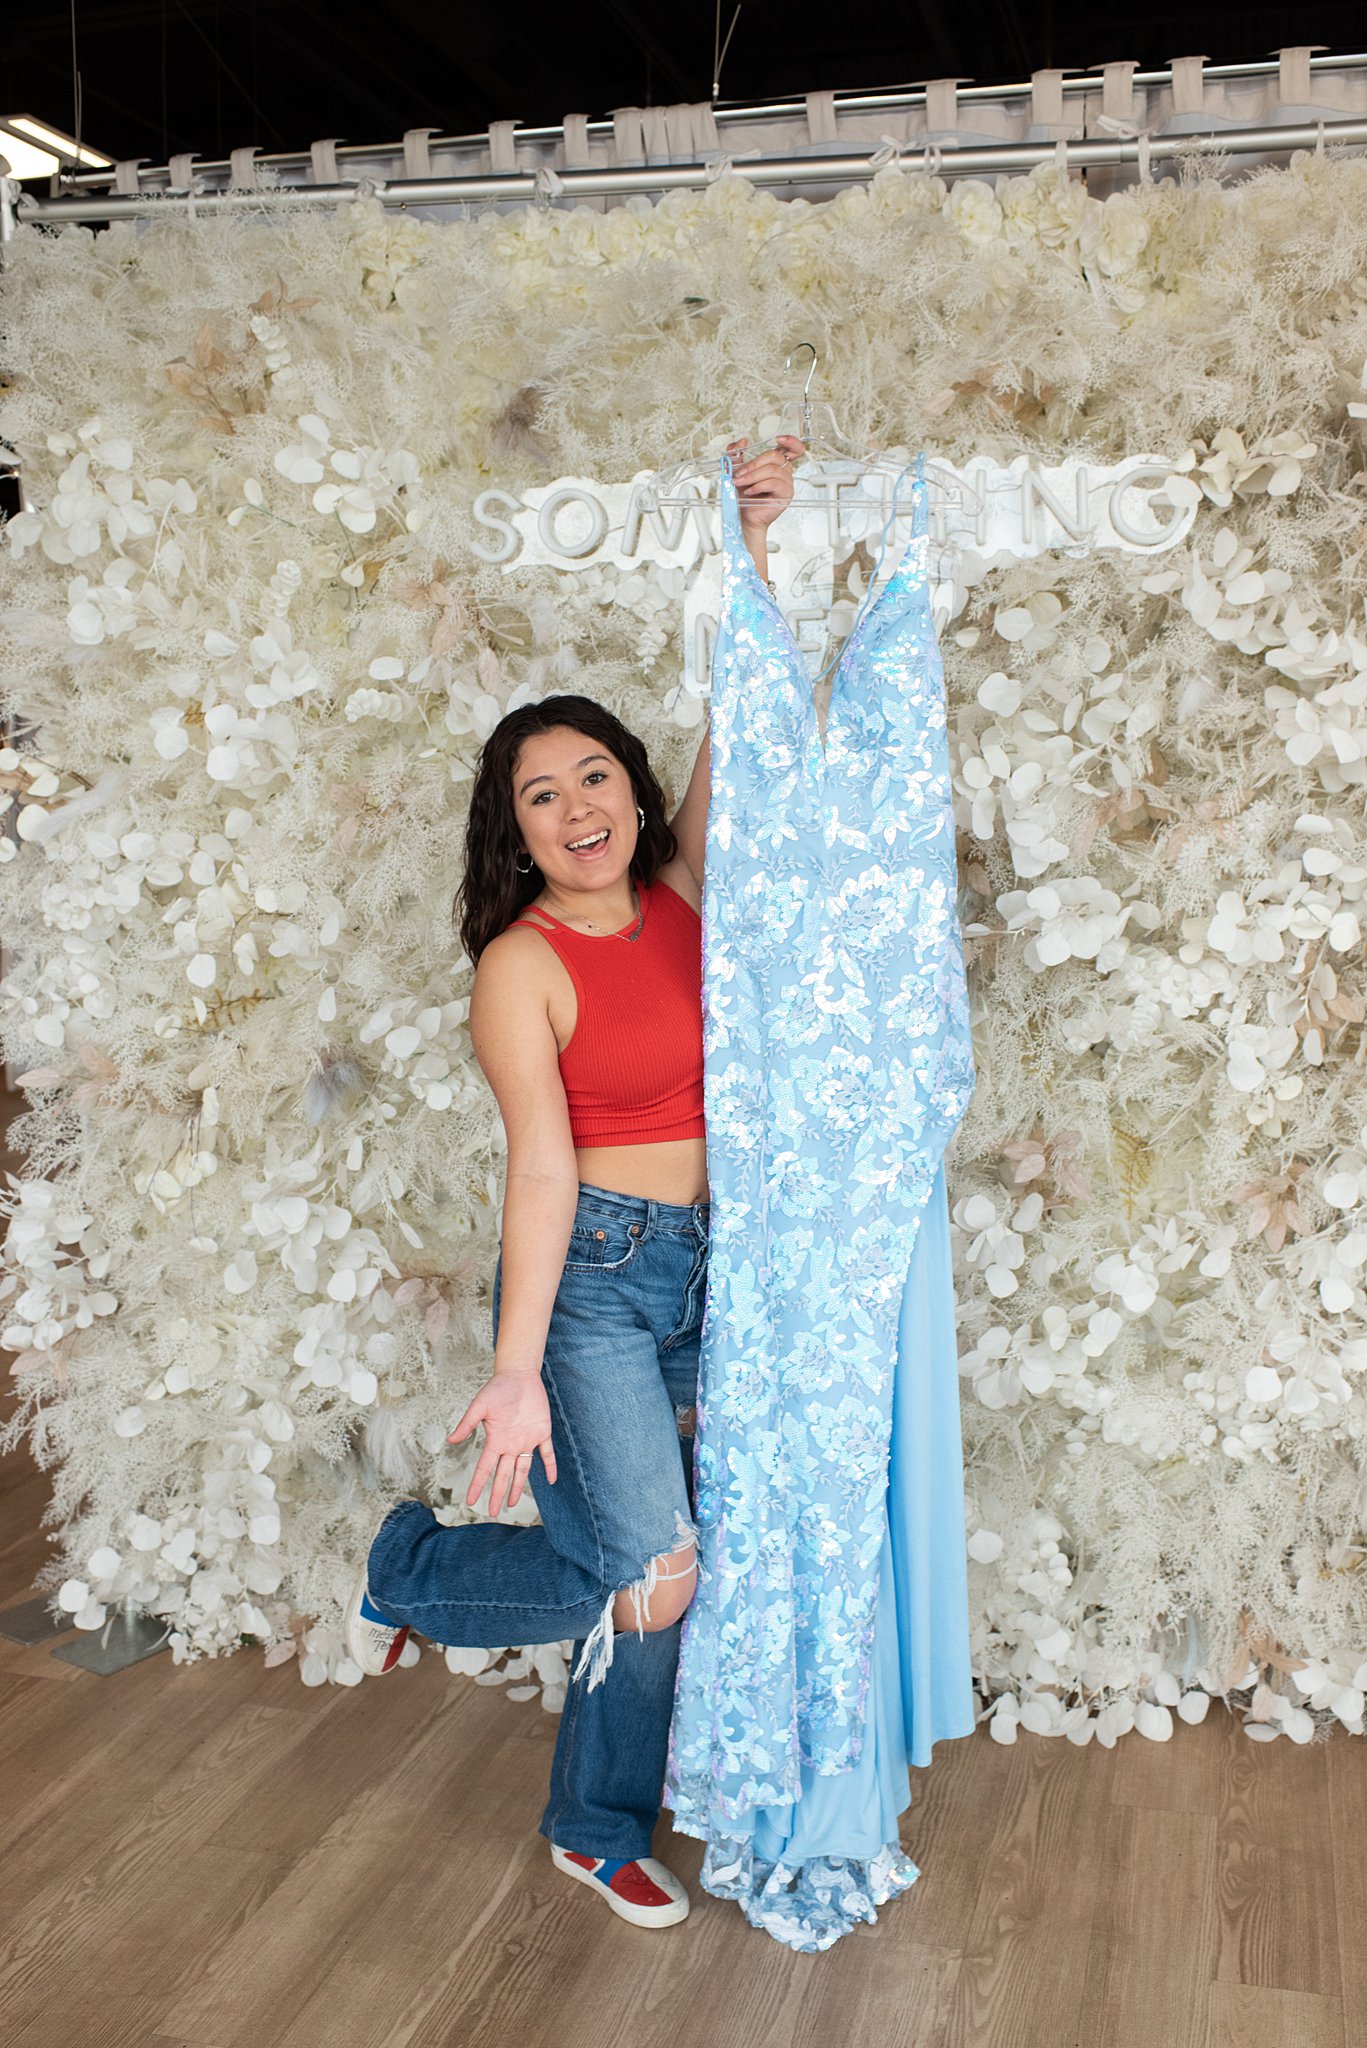 a woman in jeans stands in front of a floral backdrop holding her new blue floral gown